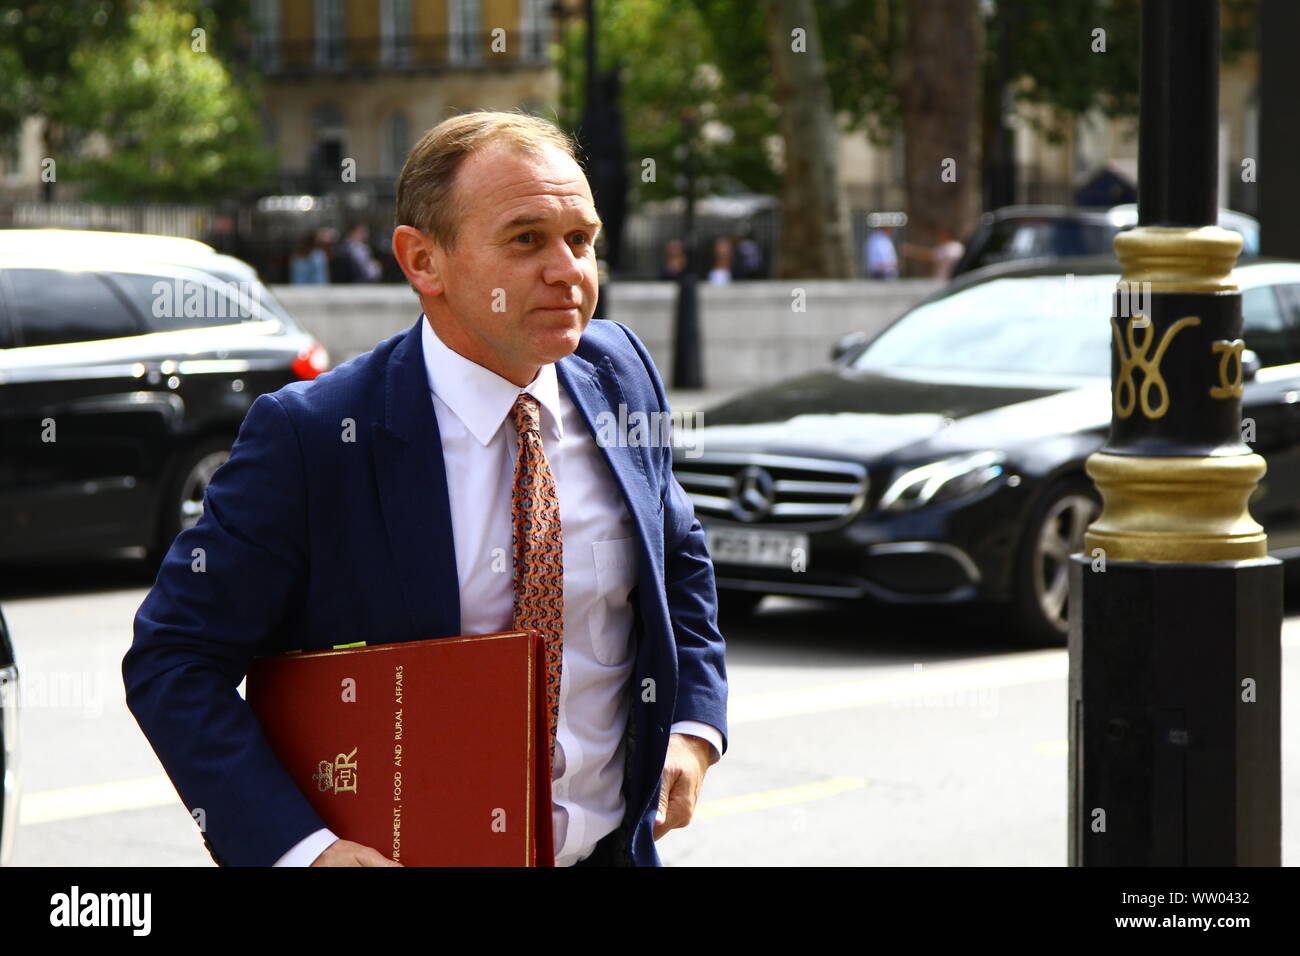 GEORGE EUSTICE MP MINISTER OF STATE FOR THE DEPARTMENT OF ENVIRONMENT, FOOD AND RURAL AFFAIRS IN WHITEHALL, WESTMINSTER ON THE 10TH SEPTEMBER 2019. CONSERVATIVE PARTY MPS. MINISTERS. TORY MPS. GOVERNMENT. BORIS JOHNSON GOVERNMENT. Stock Photo